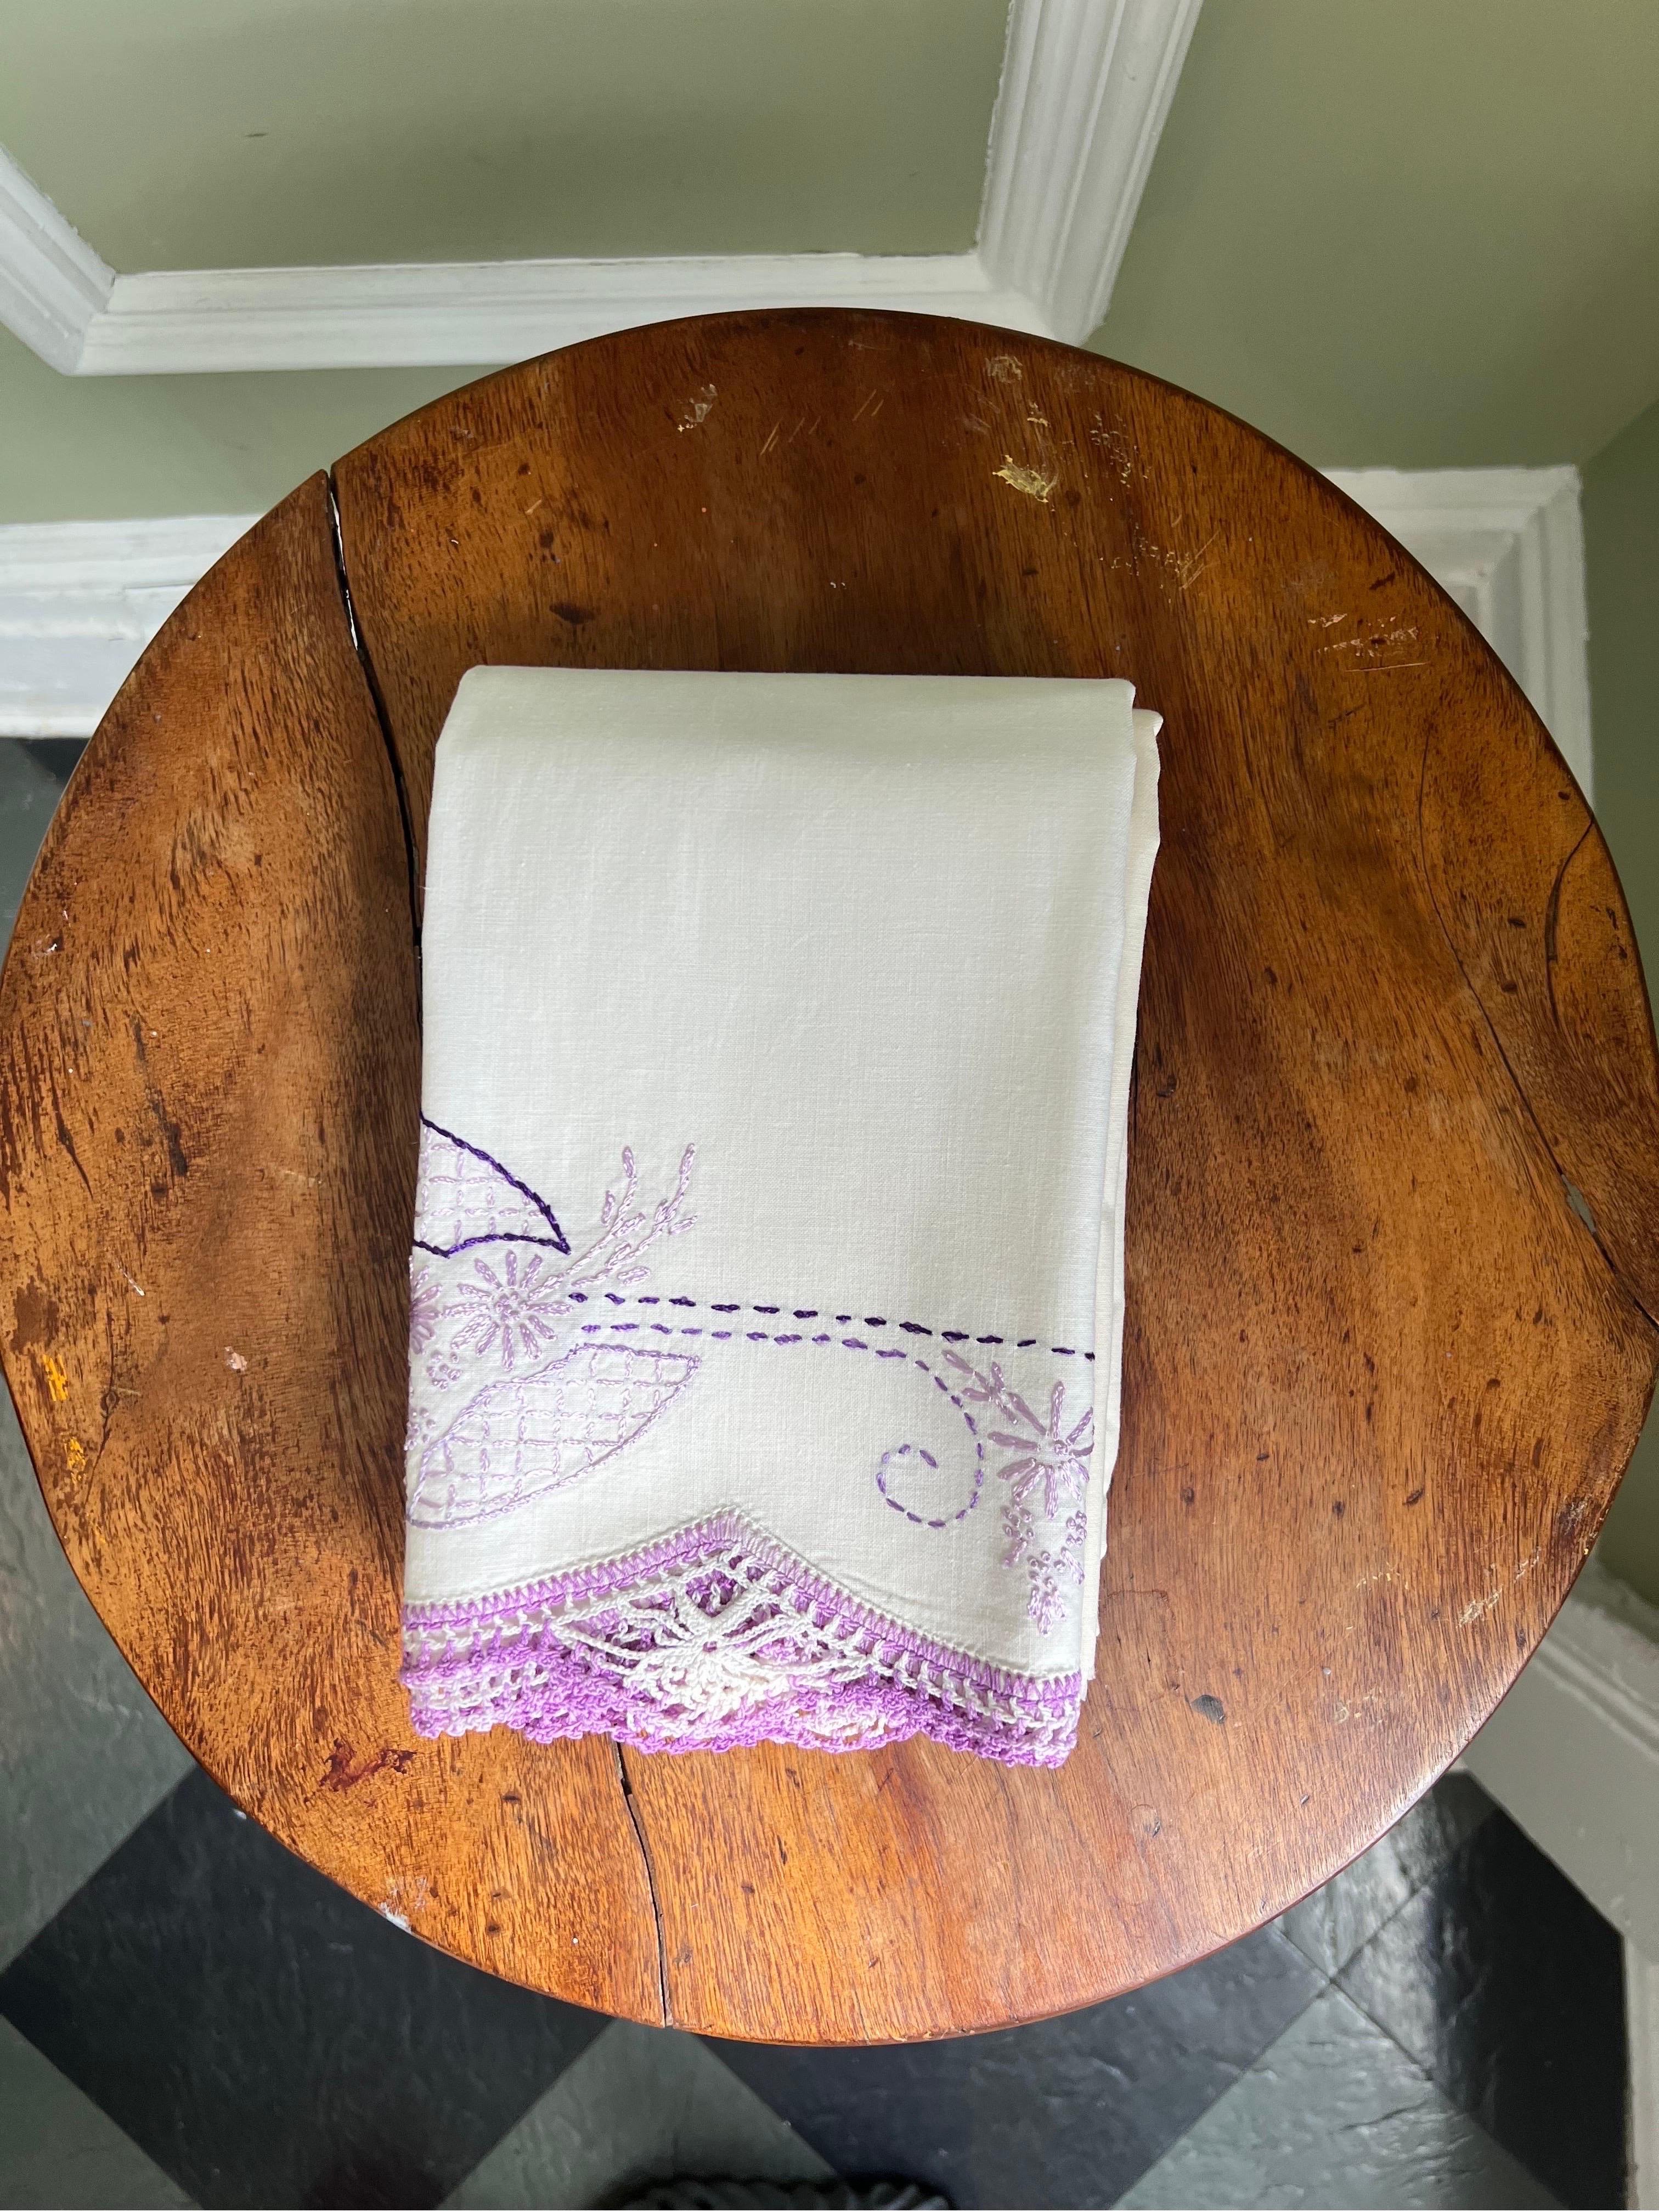 Hand-Knotted Purple Lace Trim Pillowcases, Set of 2, Raw Edge for Customization 